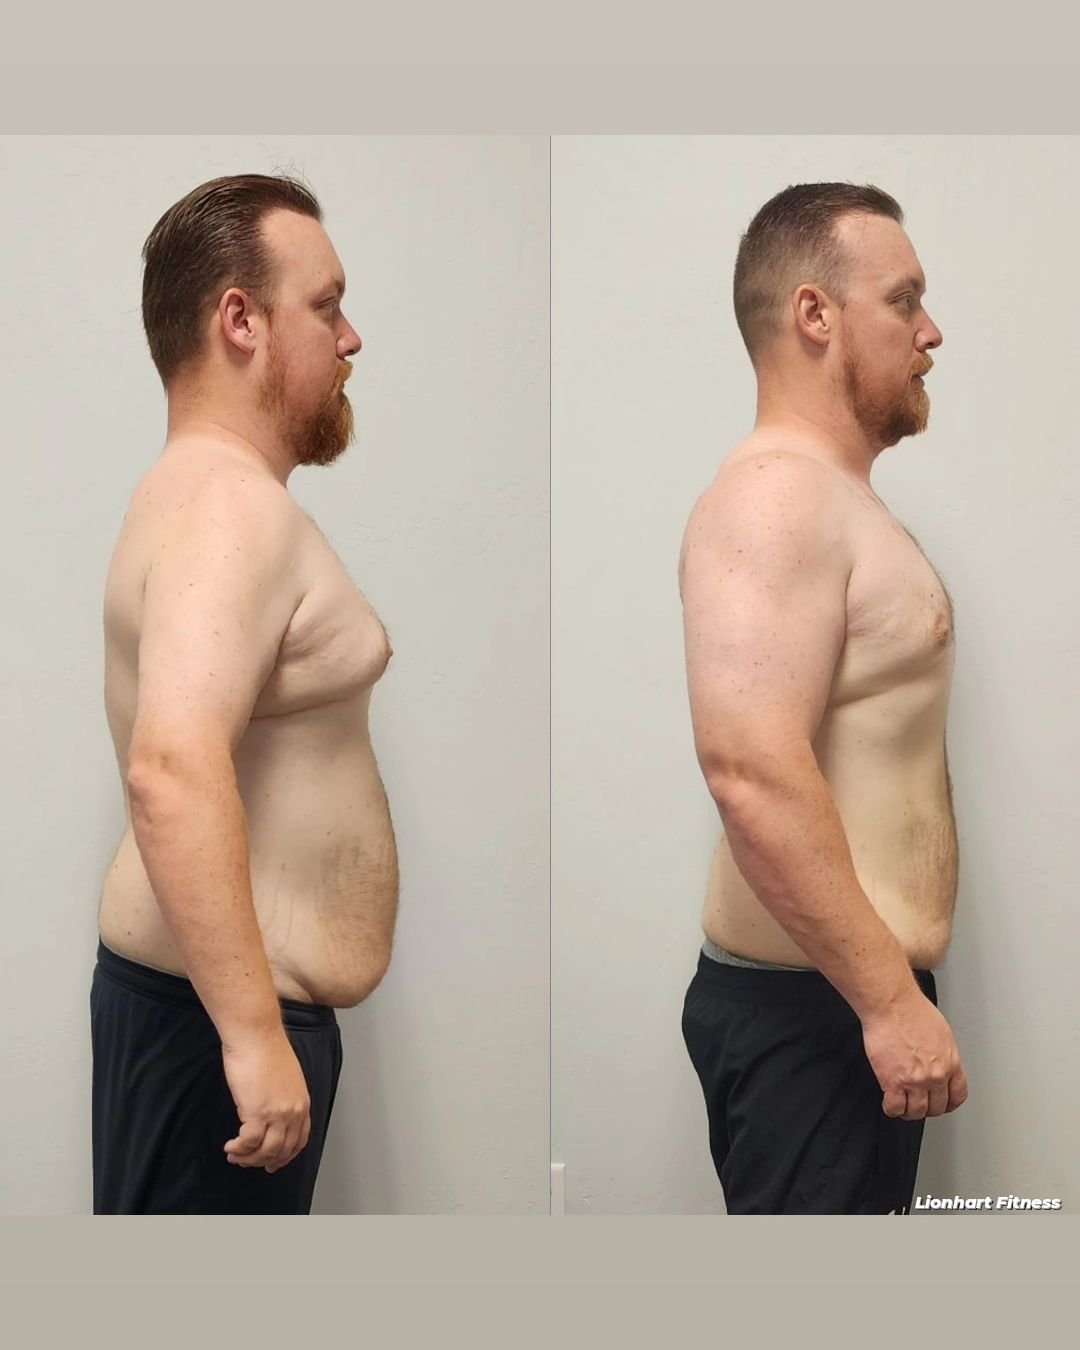 Consistency and discipline can get you faster towards any goal you set forth. If you give your body the time to change, it will. I am super proud of this client right here. He has never lifted in his life, so this journey for him has definitely been 